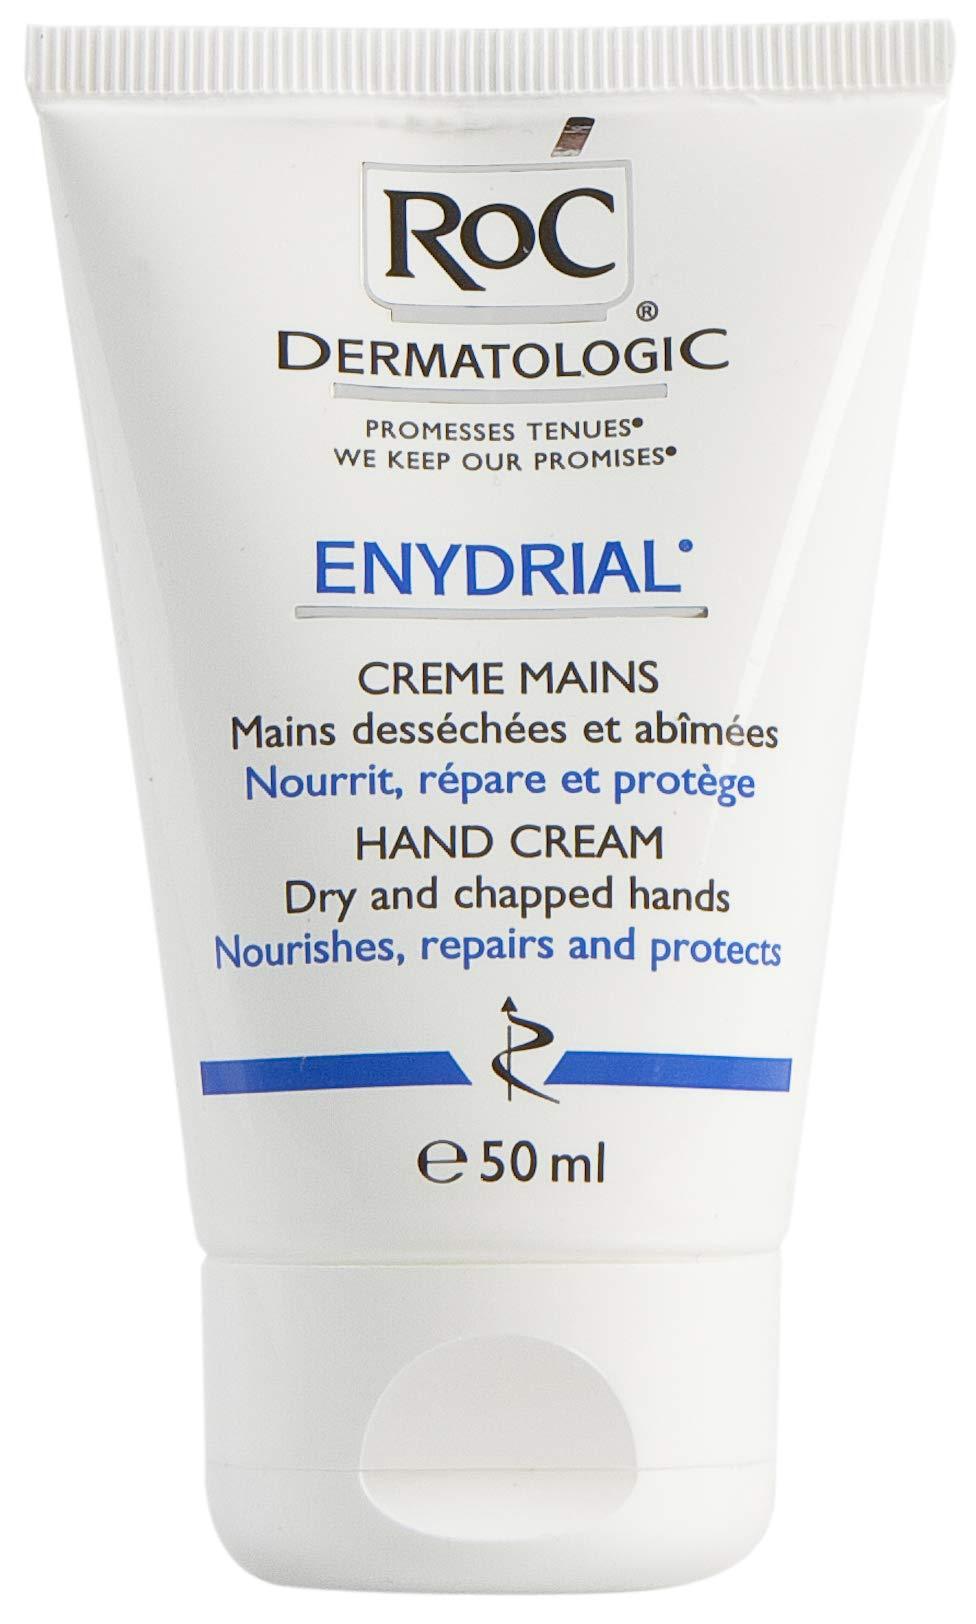 RoC - Dermatologic Enydrial Hand Cream - for Dry & Chapped Hands - Protects & Repairs - 50 ml - NewNest Australia